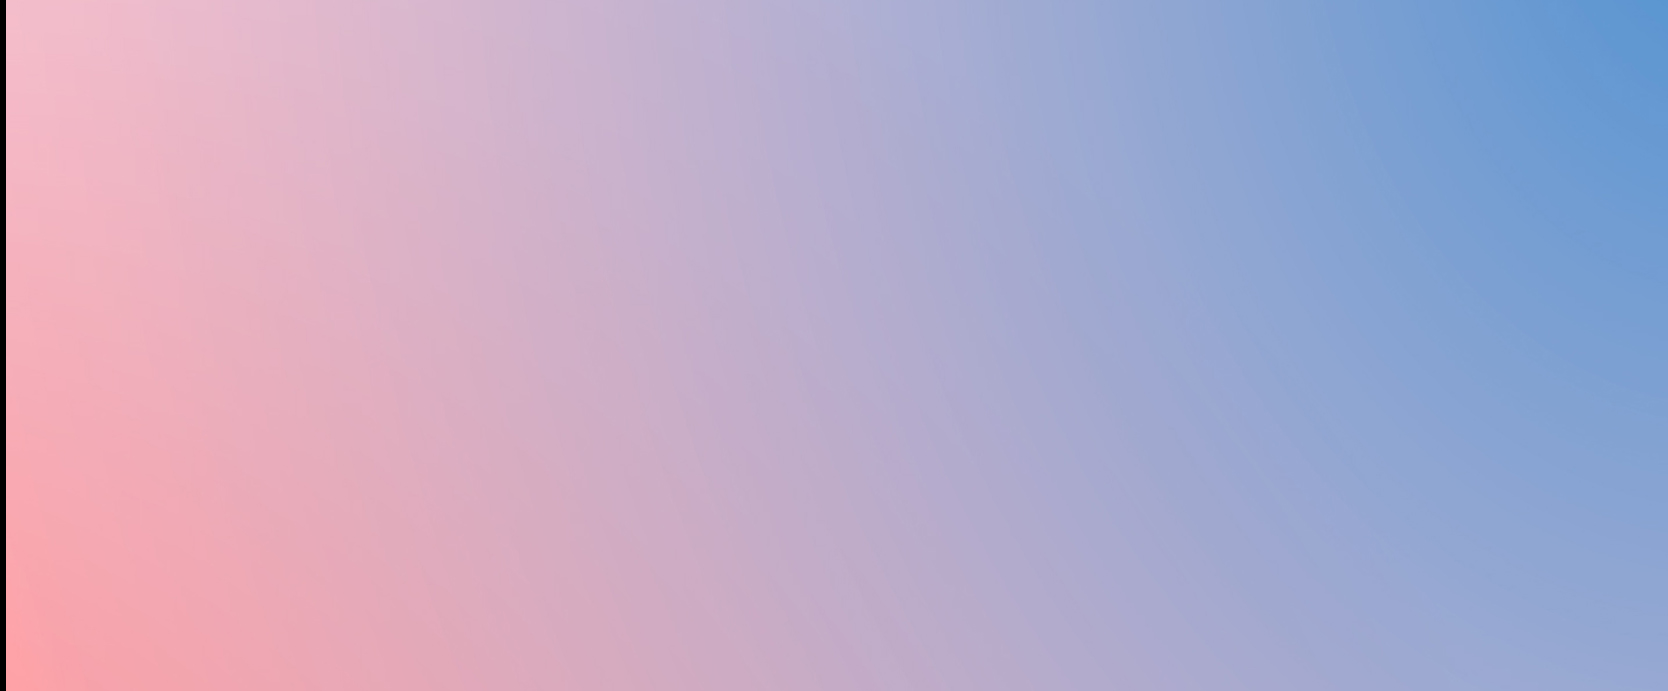 Pink and blue hazy background